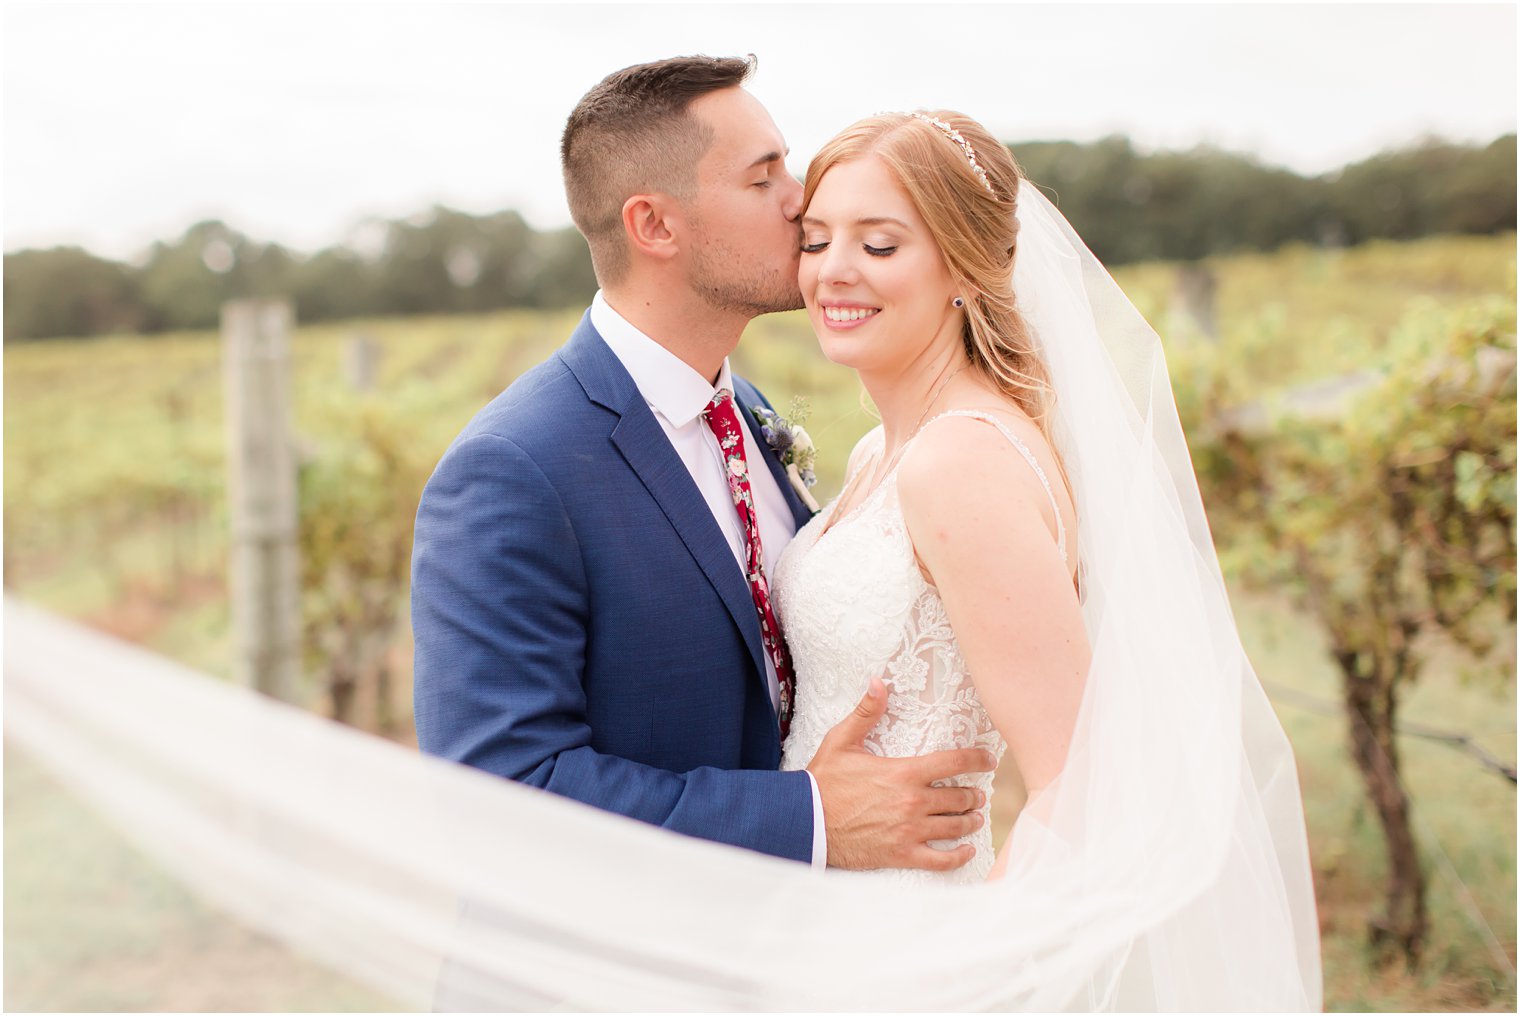 Romantic photos of couple at Laurita Winery